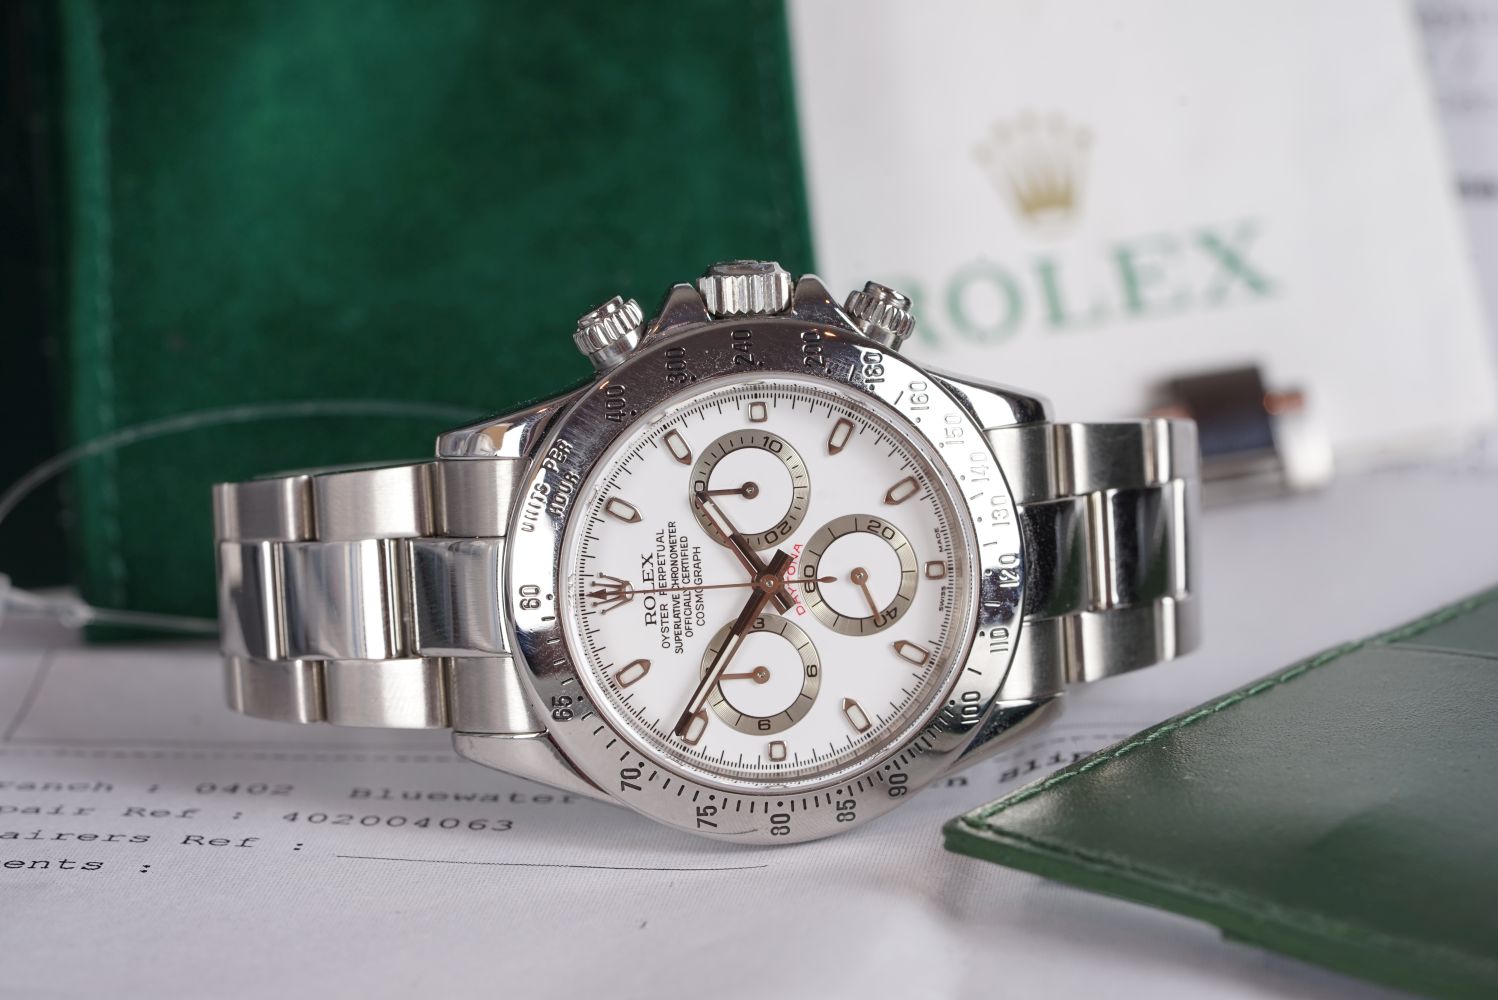 GENTLEMENS ROLEX OYSTER PERPETUAL SUPERLATIVE COSMOGRAPH DAYTONA CHRONOGRAPH WRISTWATCH W/ PUNCHED - Image 2 of 5